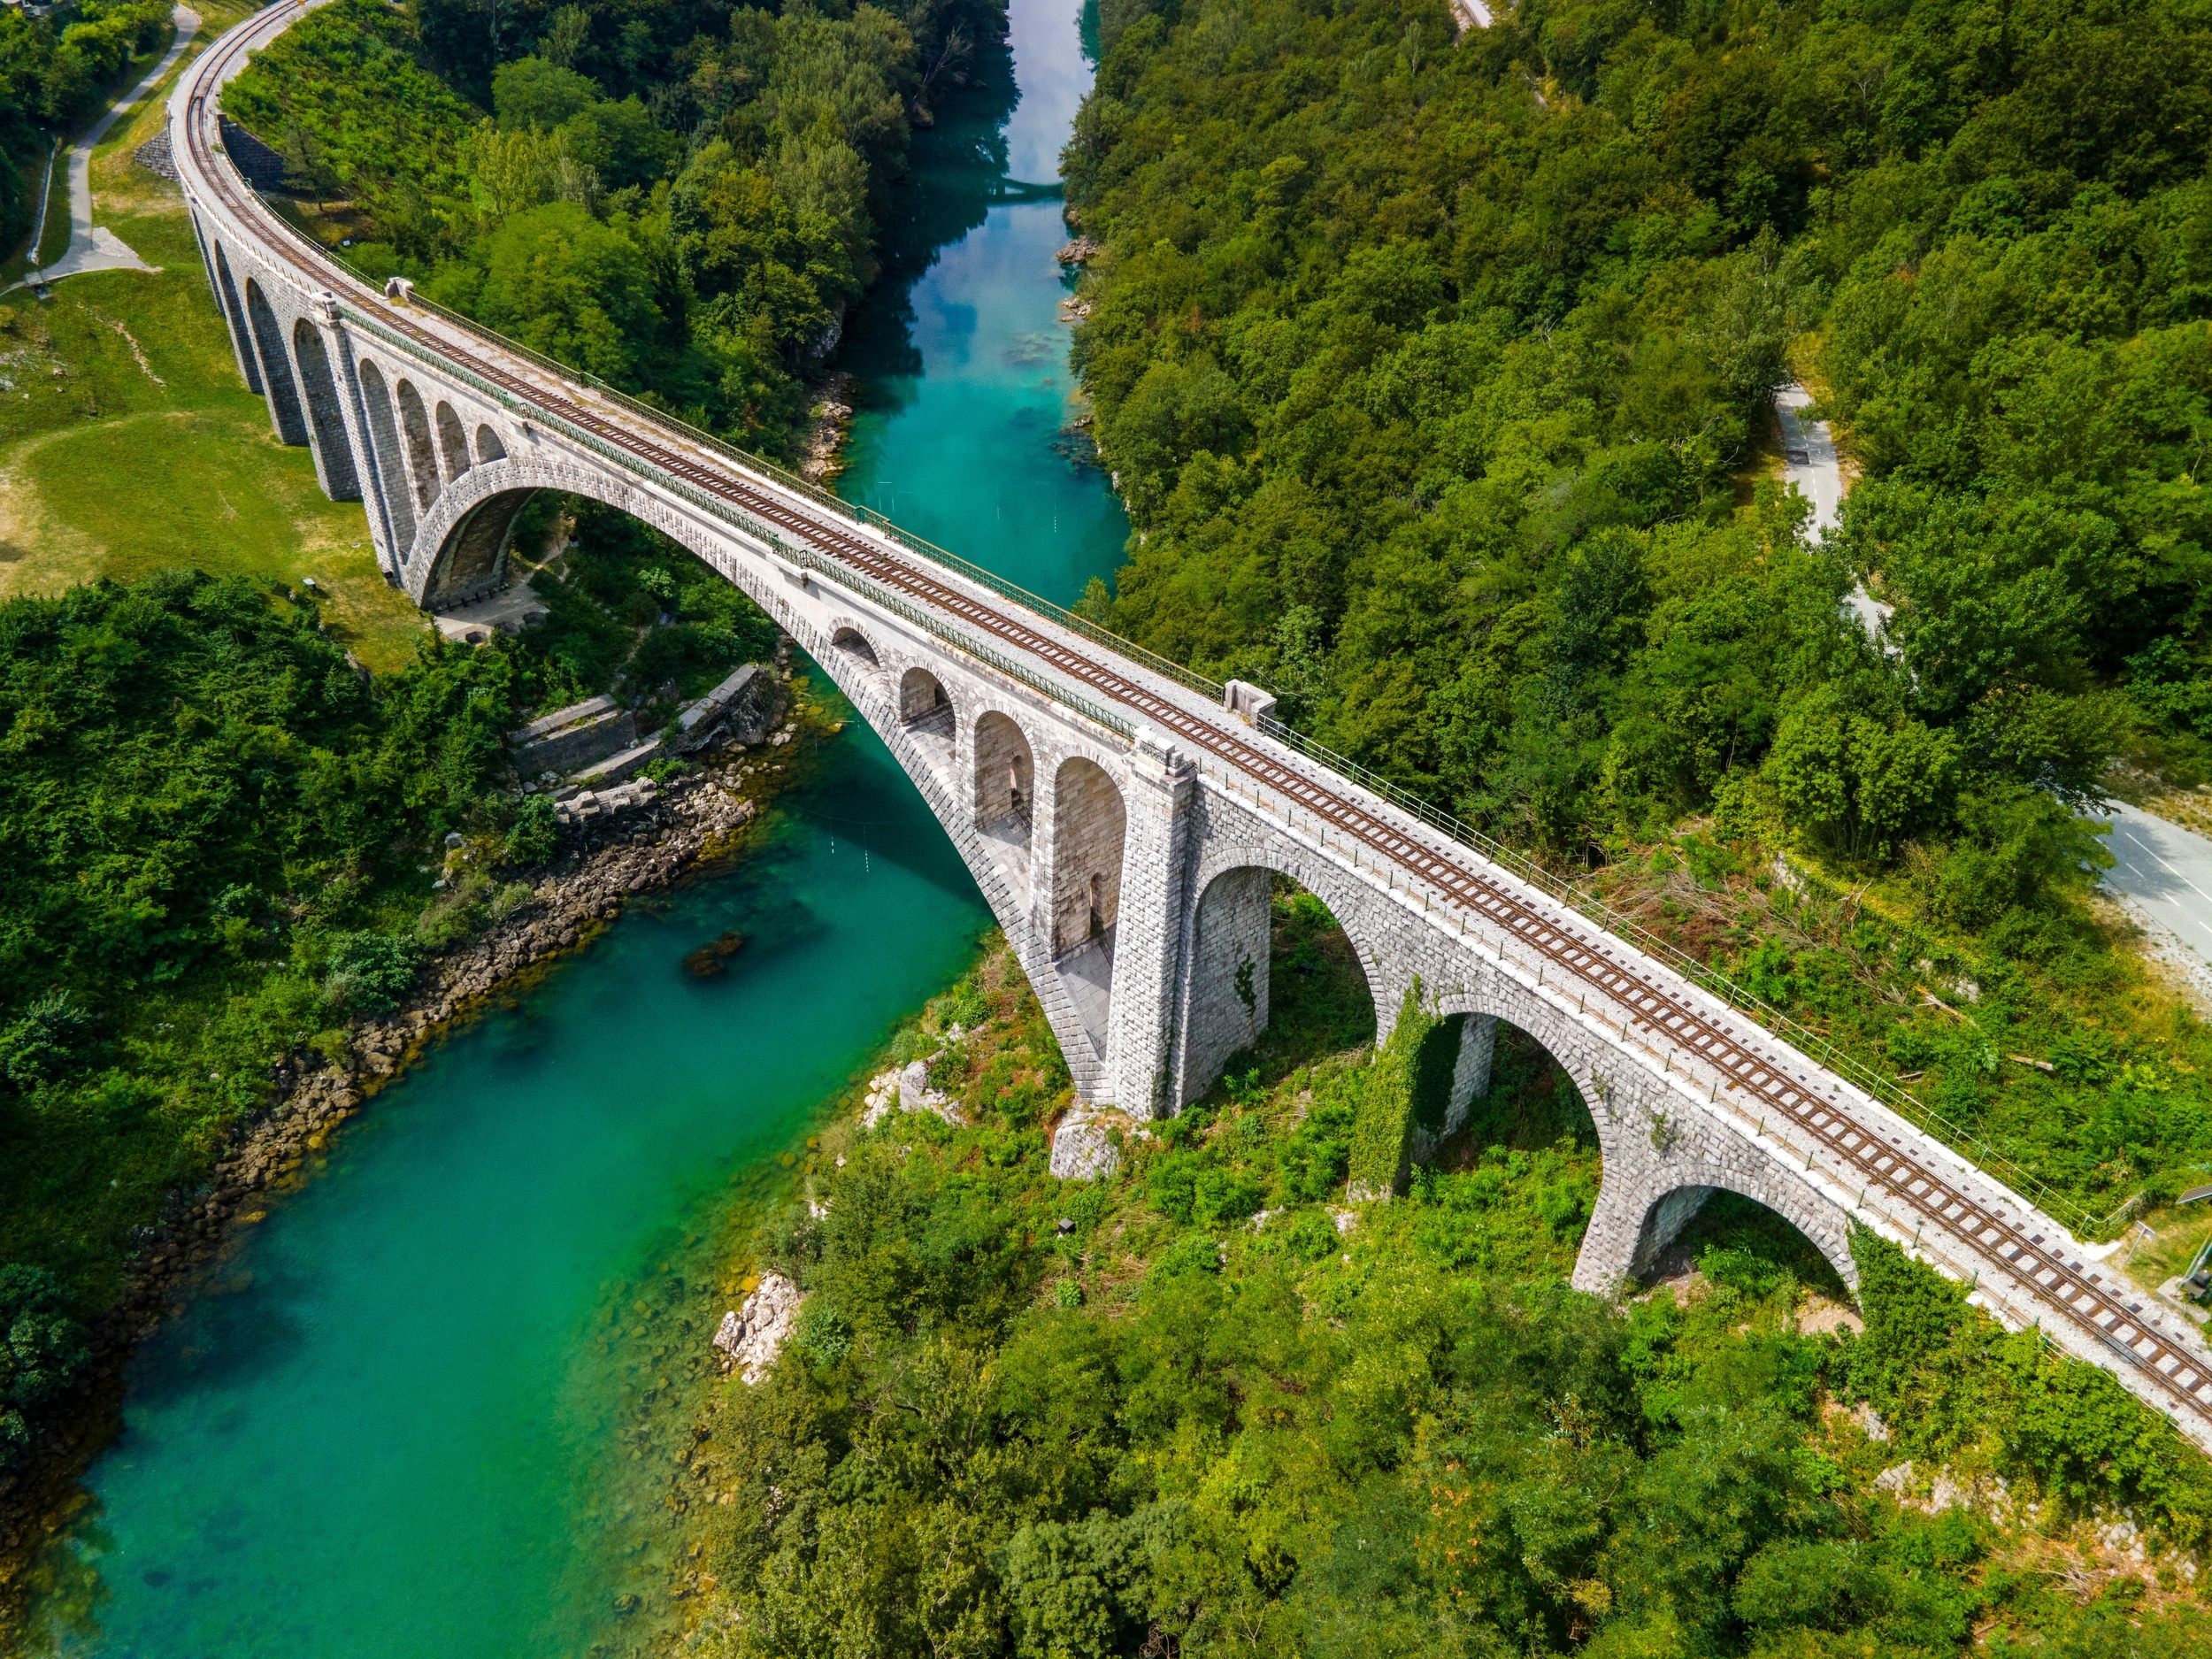 <p>The Bohinj Nostalgia Train is a three-and-a-half to four-hour ride through some of the prettiest parts of Slovenia. Visit the breathtaking Vintgar Gorge and the imposing Julian Alps before crossing into Italy. It’s the perfect way to see the area without a car!</p><p><a href='https://www.msn.com/en-us/community/channel/vid-cj9pqbr0vn9in2b6ddcd8sfgpfq6x6utp44fssrv6mc2gtybw0us'>Follow us on MSN to see more of our exclusive lifestyle content.</a></p>